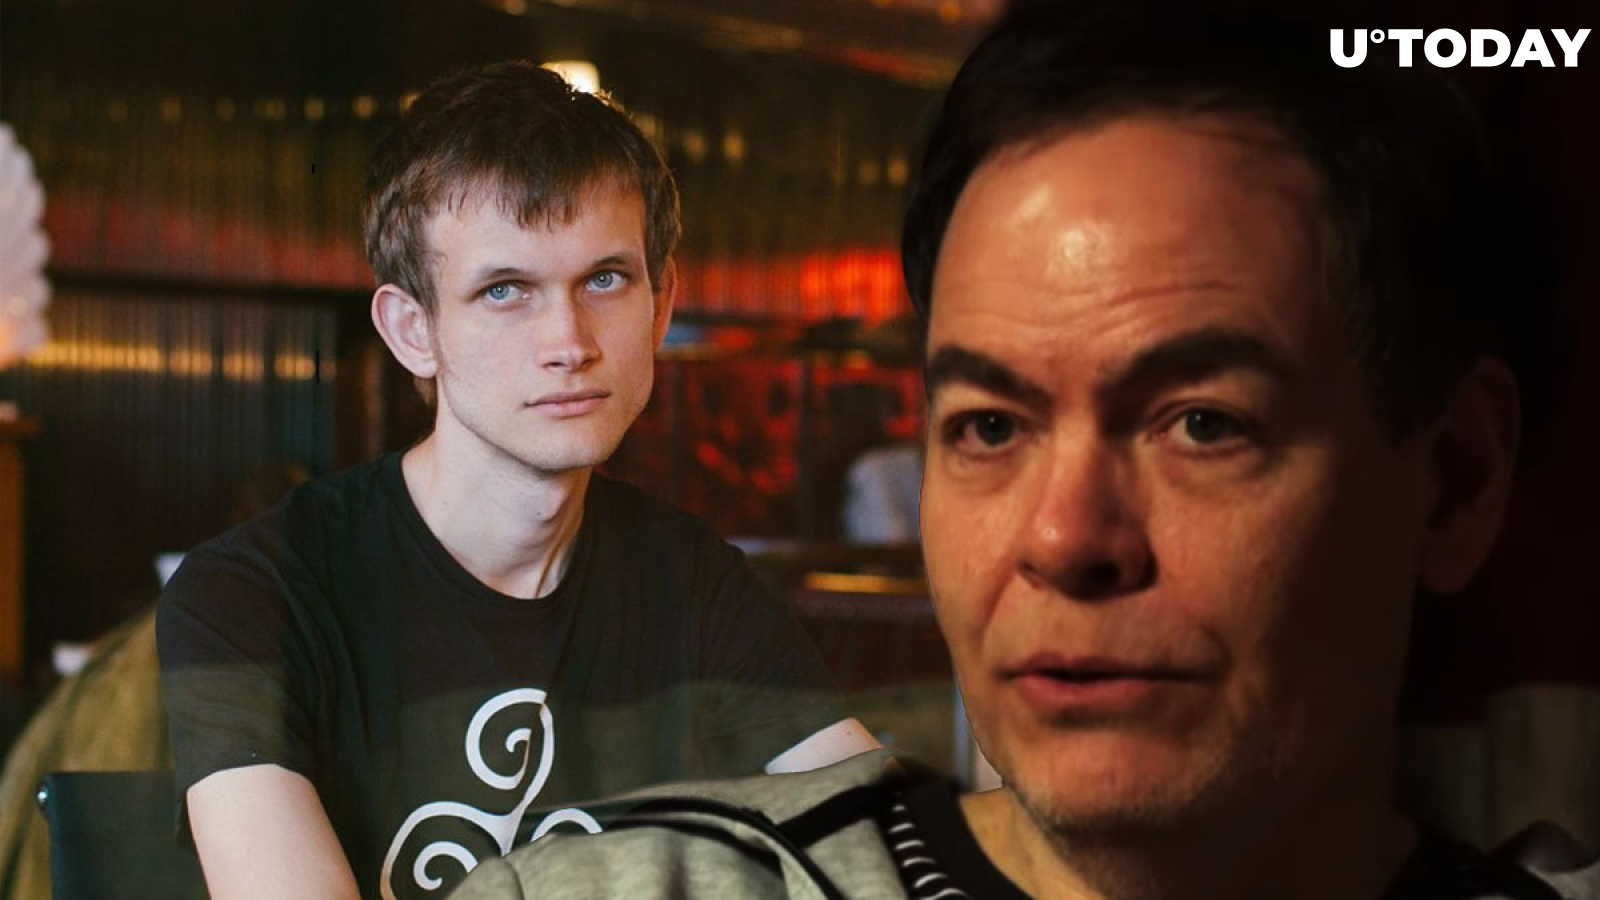 Max Keiser Claims Ethereum Founder Vitalik Buterin Doesn't Understand Bitcoin